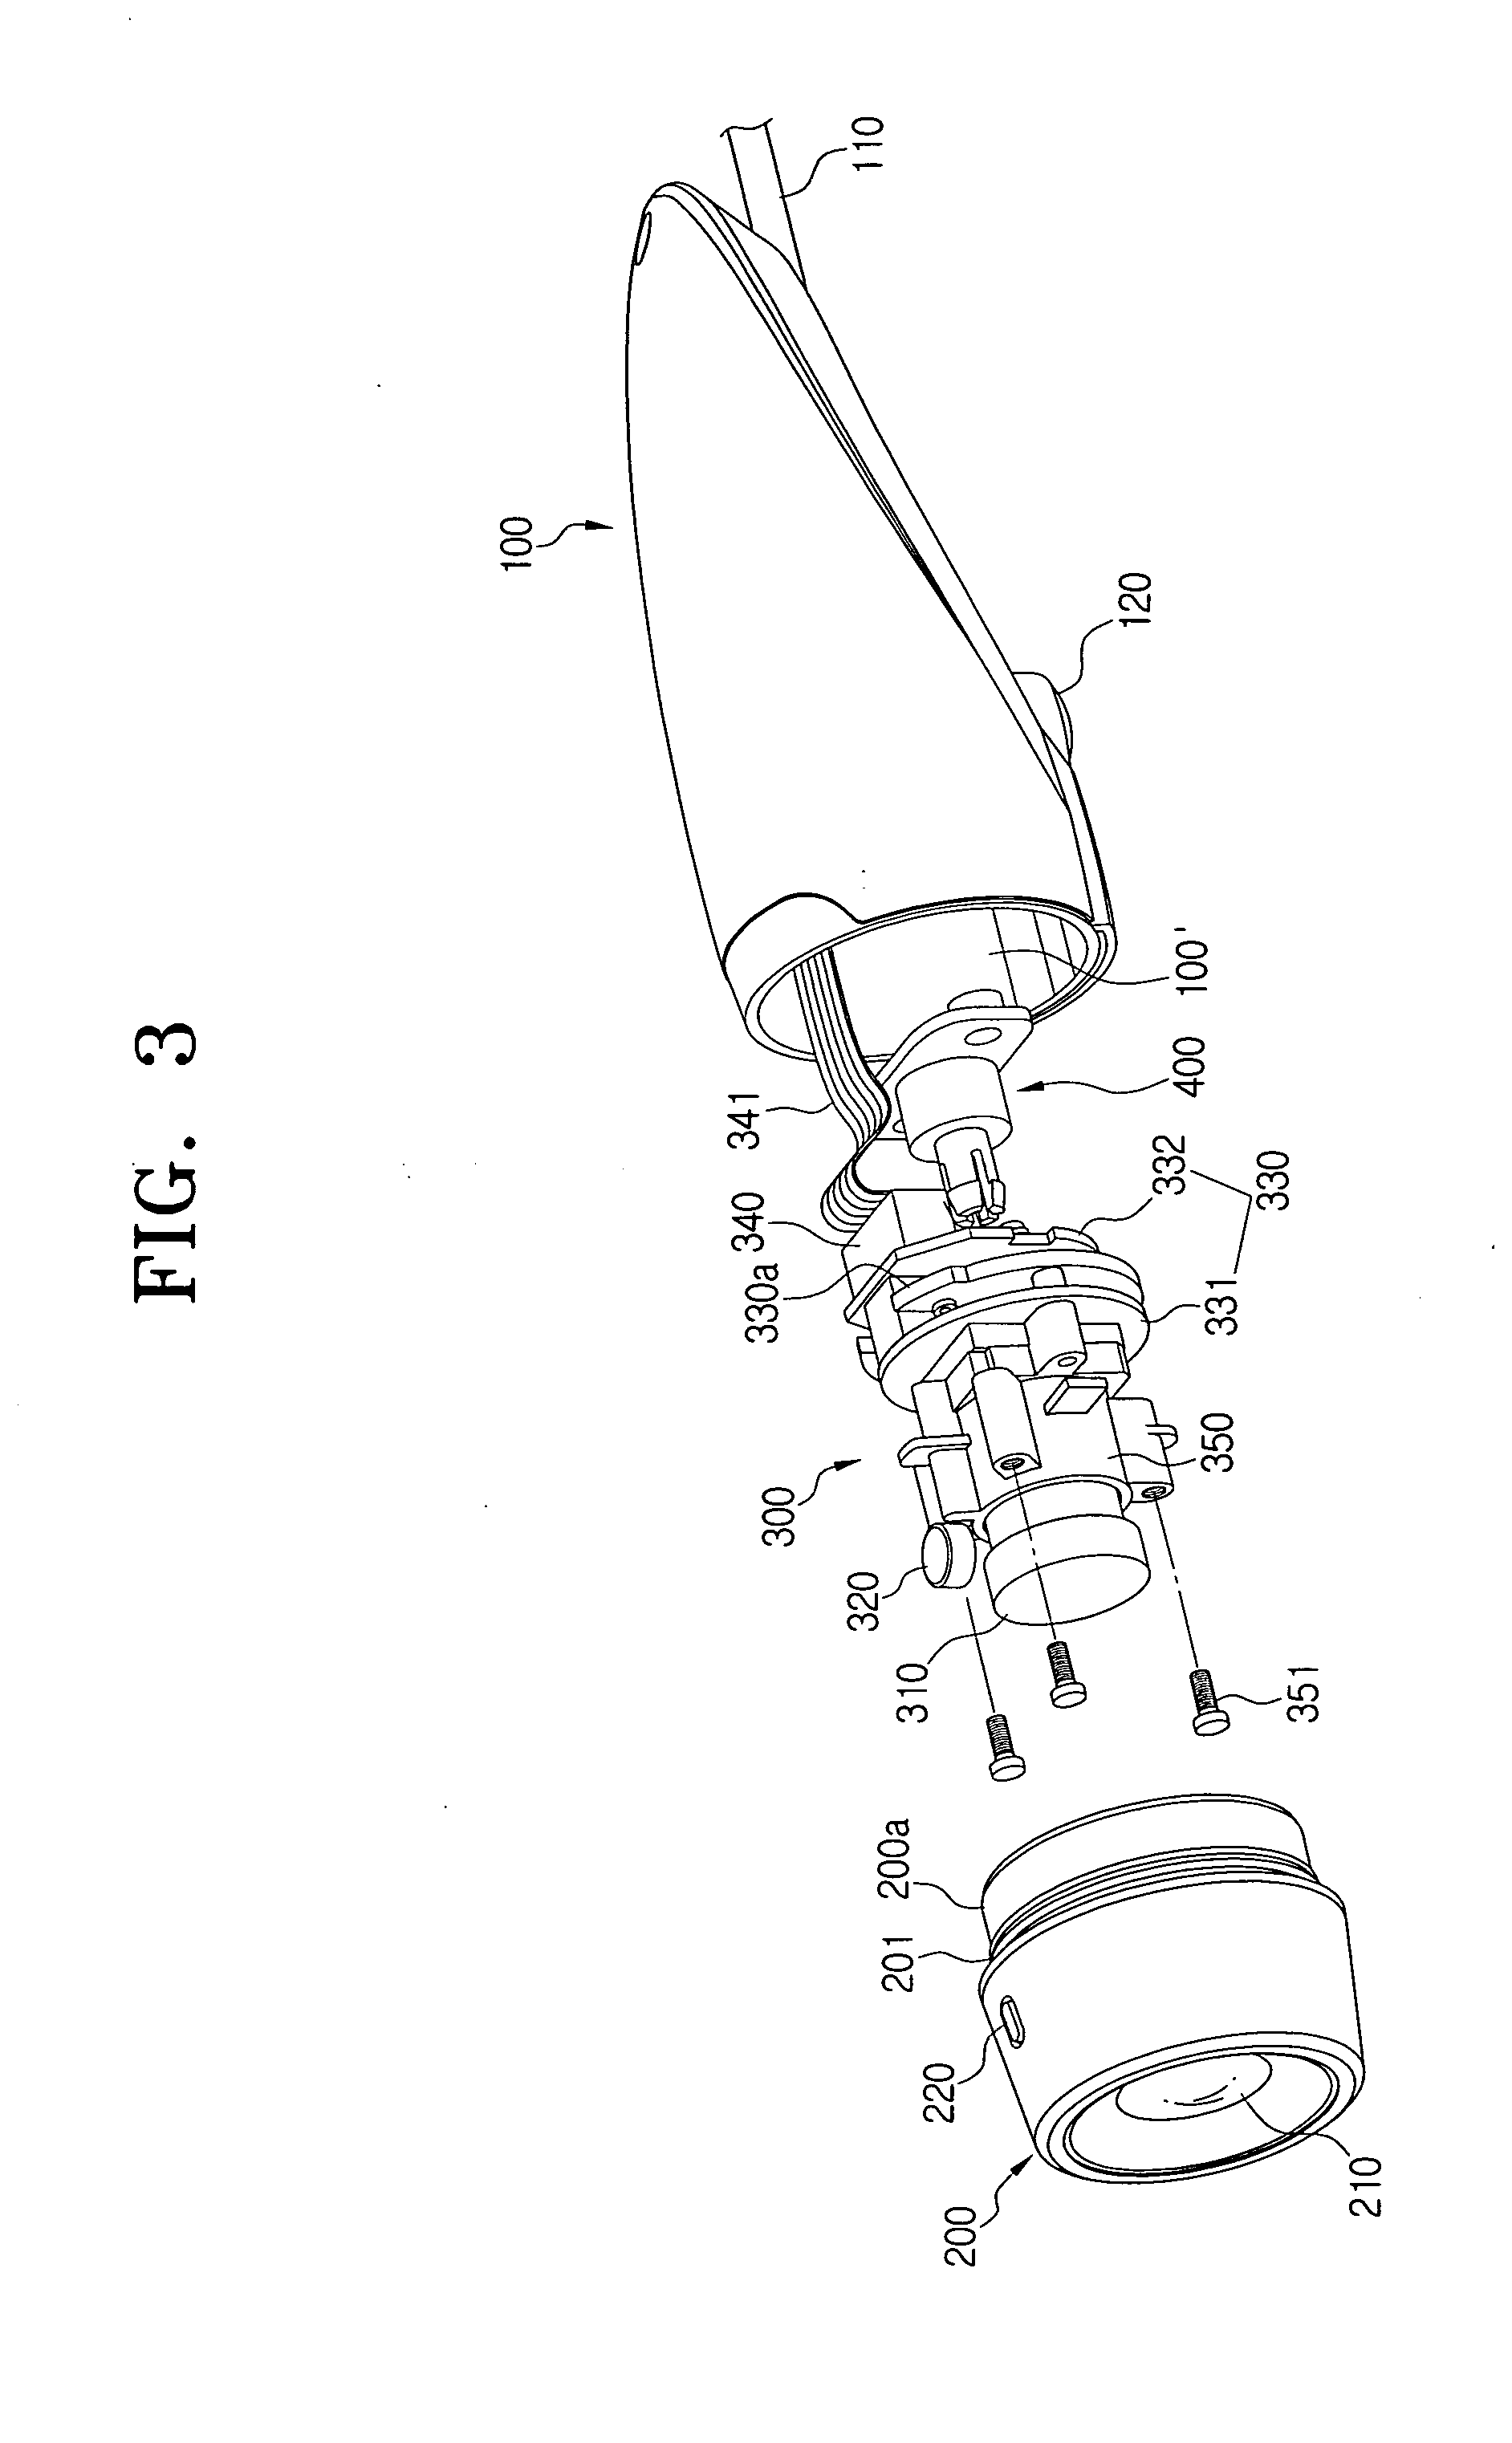 External camera and image photographing apparatus